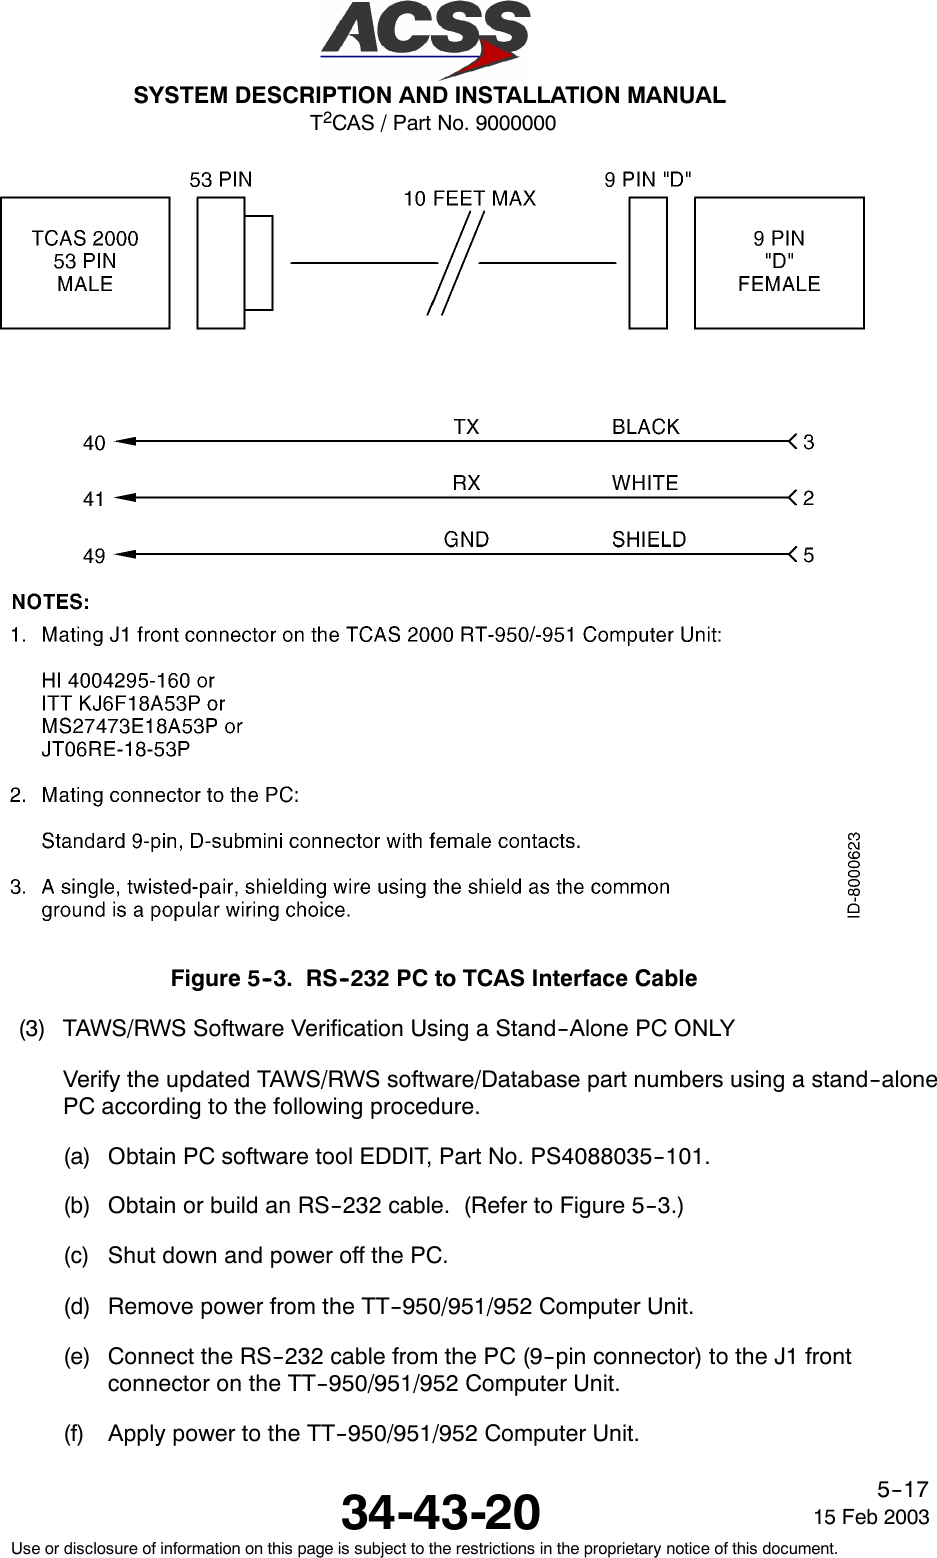 T2CAS / Part No. 9000000SYSTEM DESCRIPTION AND INSTALLATION MANUAL34-43-20 15 Feb 2003Use or disclosure of information on this page is subject to the restrictions in the proprietary notice of this document.5--17Figure 5--3. RS--232 PC to TCAS Interface Cable(3) TAWS/RWS Software Verification Using a Stand--Alone PC ONLYVerify the updated TAWS/RWS software/Database part numbers using a stand--alonePC according to the following procedure.(a) Obtain PC software tool EDDIT, Part No. PS4088035--101.(b) Obtain or build an RS--232 cable. (Refer to Figure 5--3.)(c) Shut down and power off the PC.(d) Remove power from the TT--950/951/952 Computer Unit.(e) Connect the RS--232 cable from the PC (9--pin connector) to the J1 frontconnector on the TT--950/951/952 Computer Unit.(f) Apply power to the TT--950/951/952 Computer Unit.